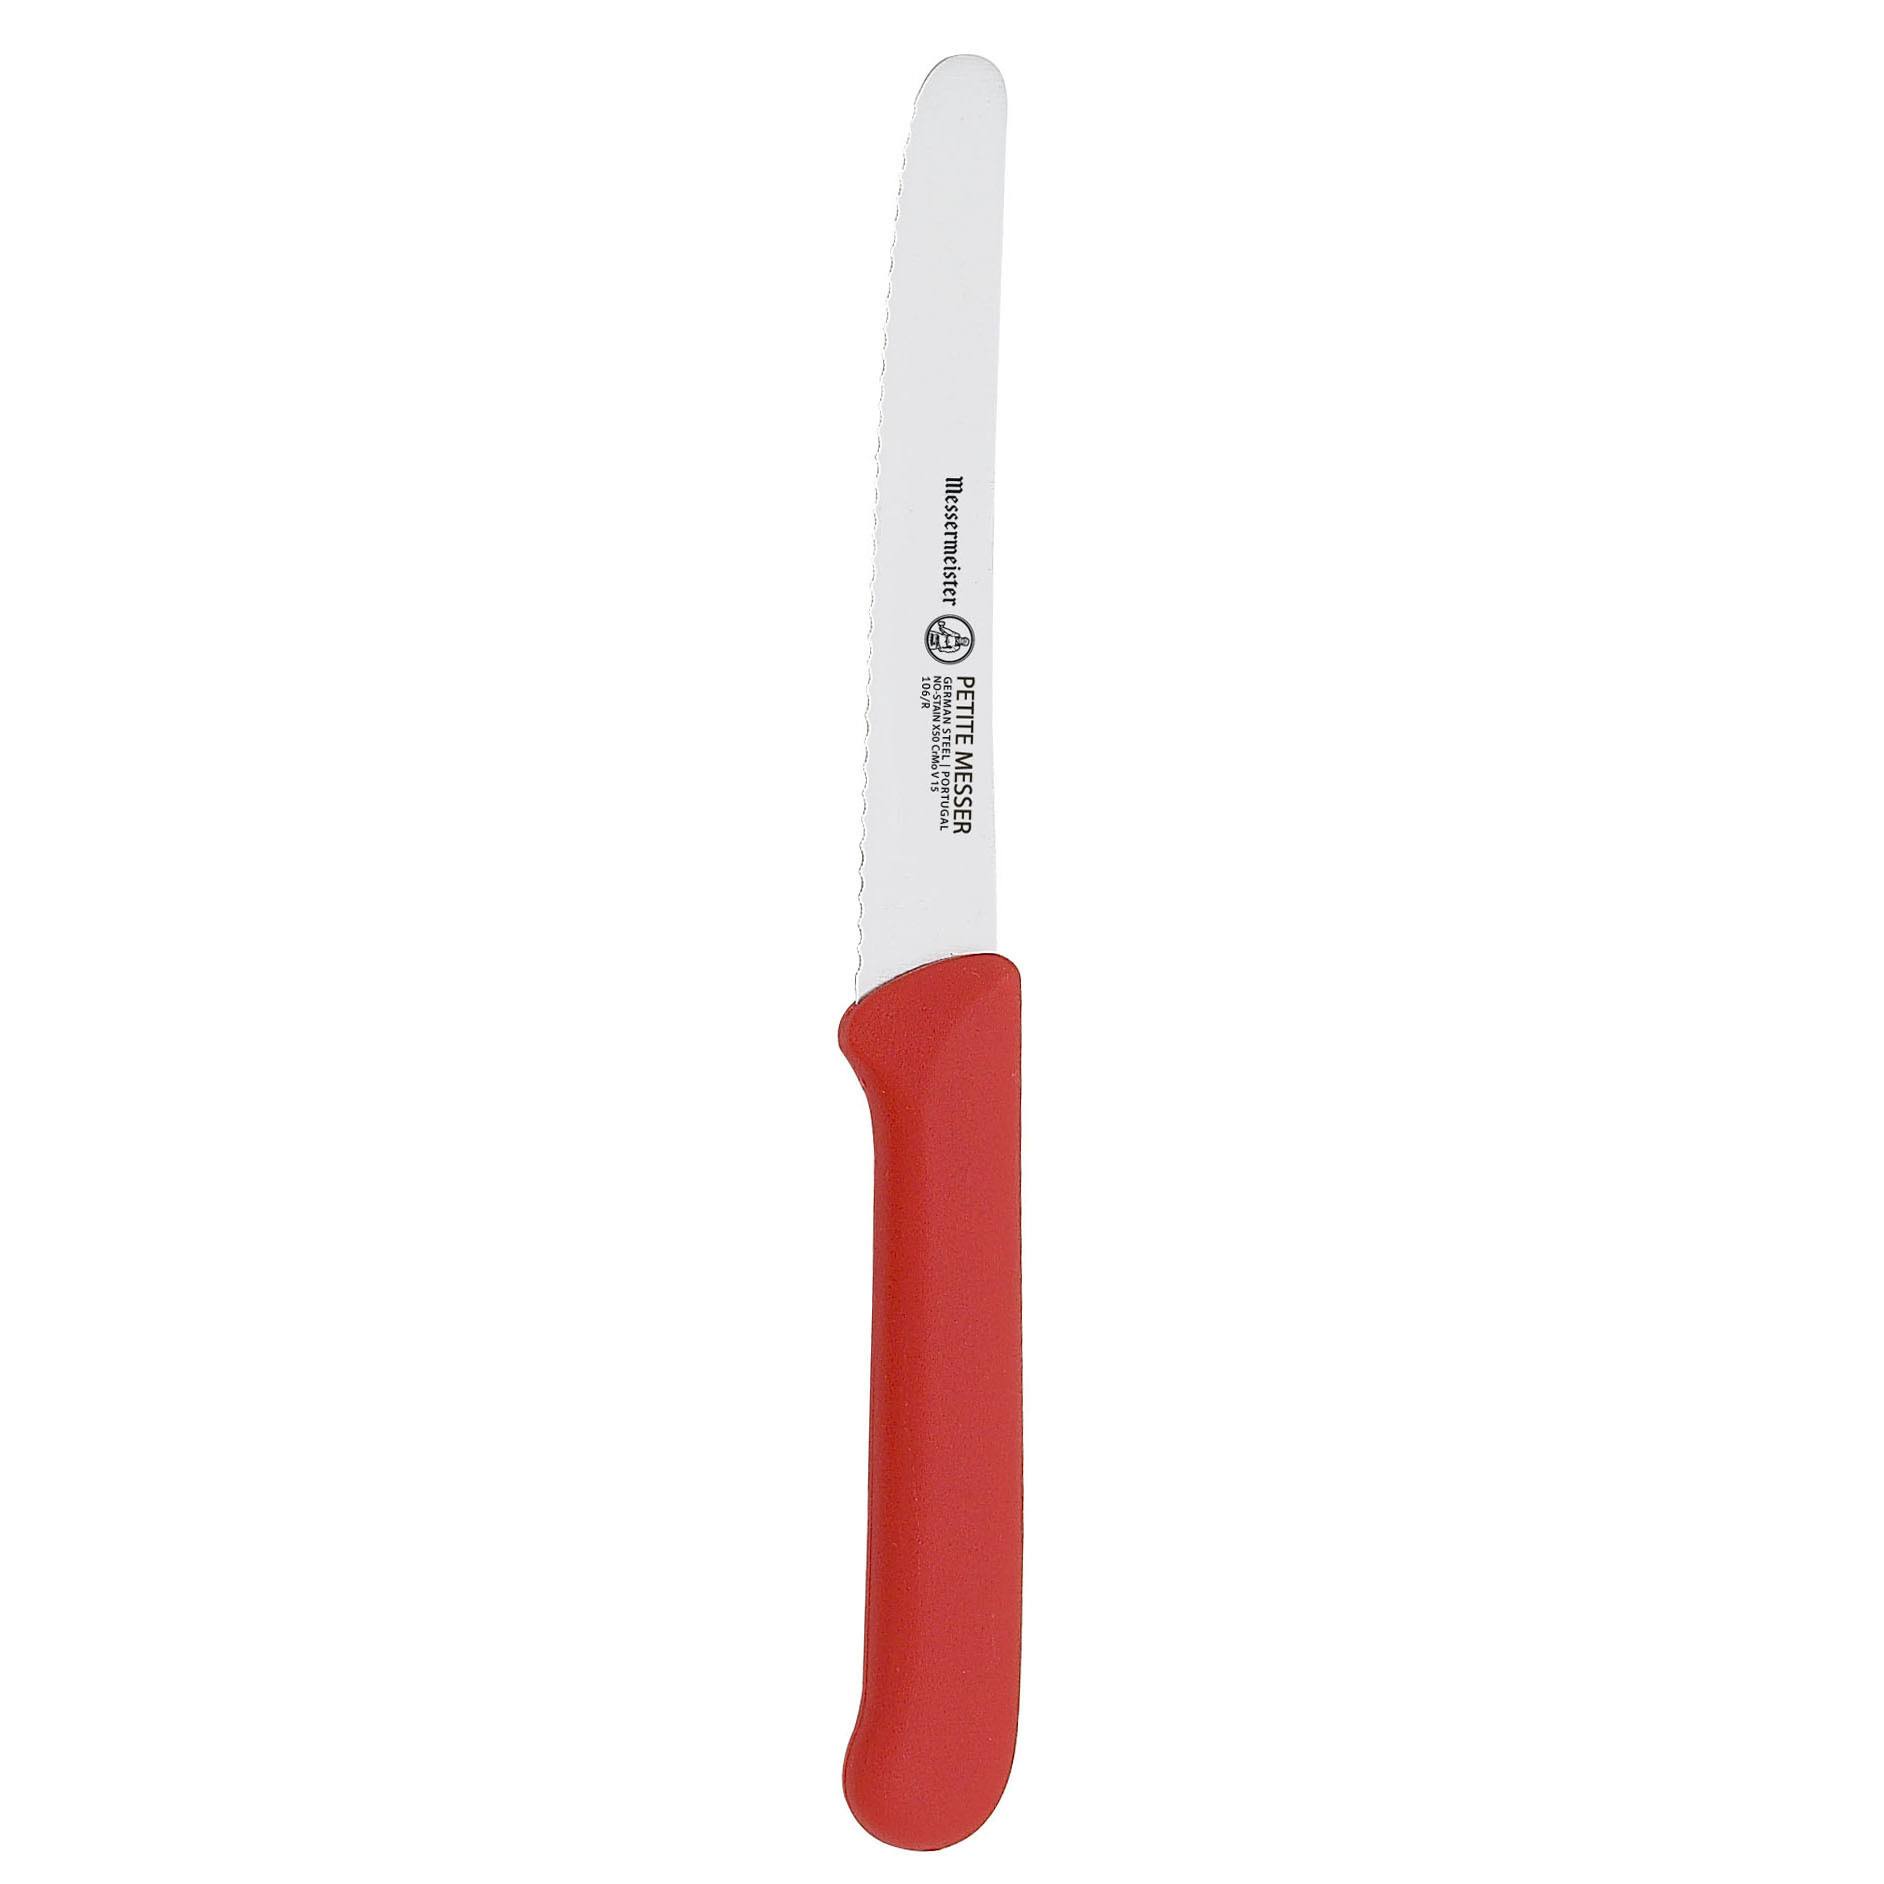 Messermeister 4.5 inch Serrated Tomato Knife with Sheath - Red